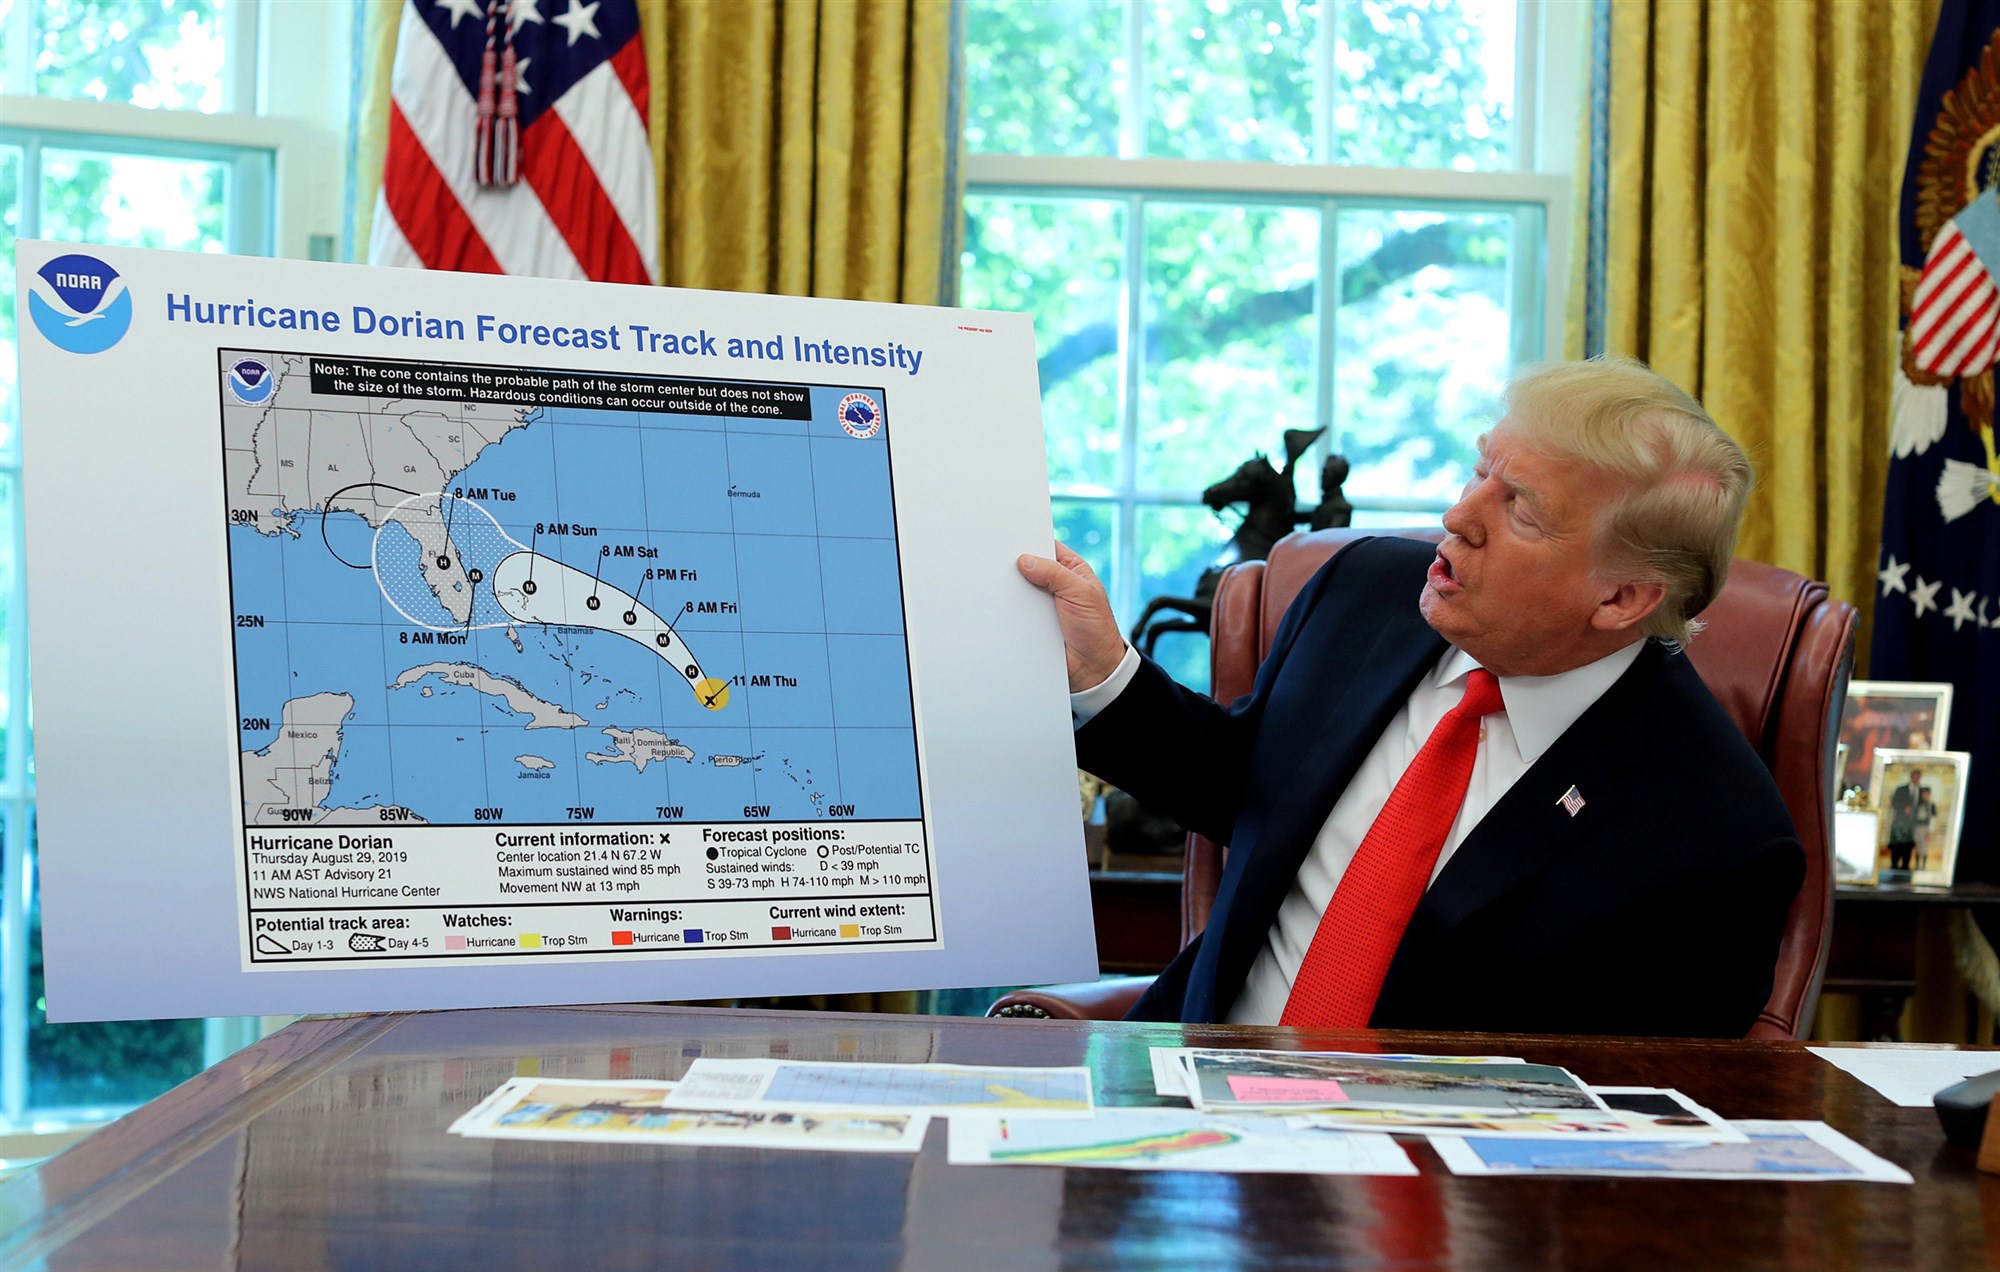 Trump holds an early projection map of Hurricane Dorian in the Oval Office on 4 September 2019. The projected path of the hurricane has been extended into Alabama with a Sharpie pen, almost certainly by Trump himself. Photo: Jonathan Ernst / Reuters